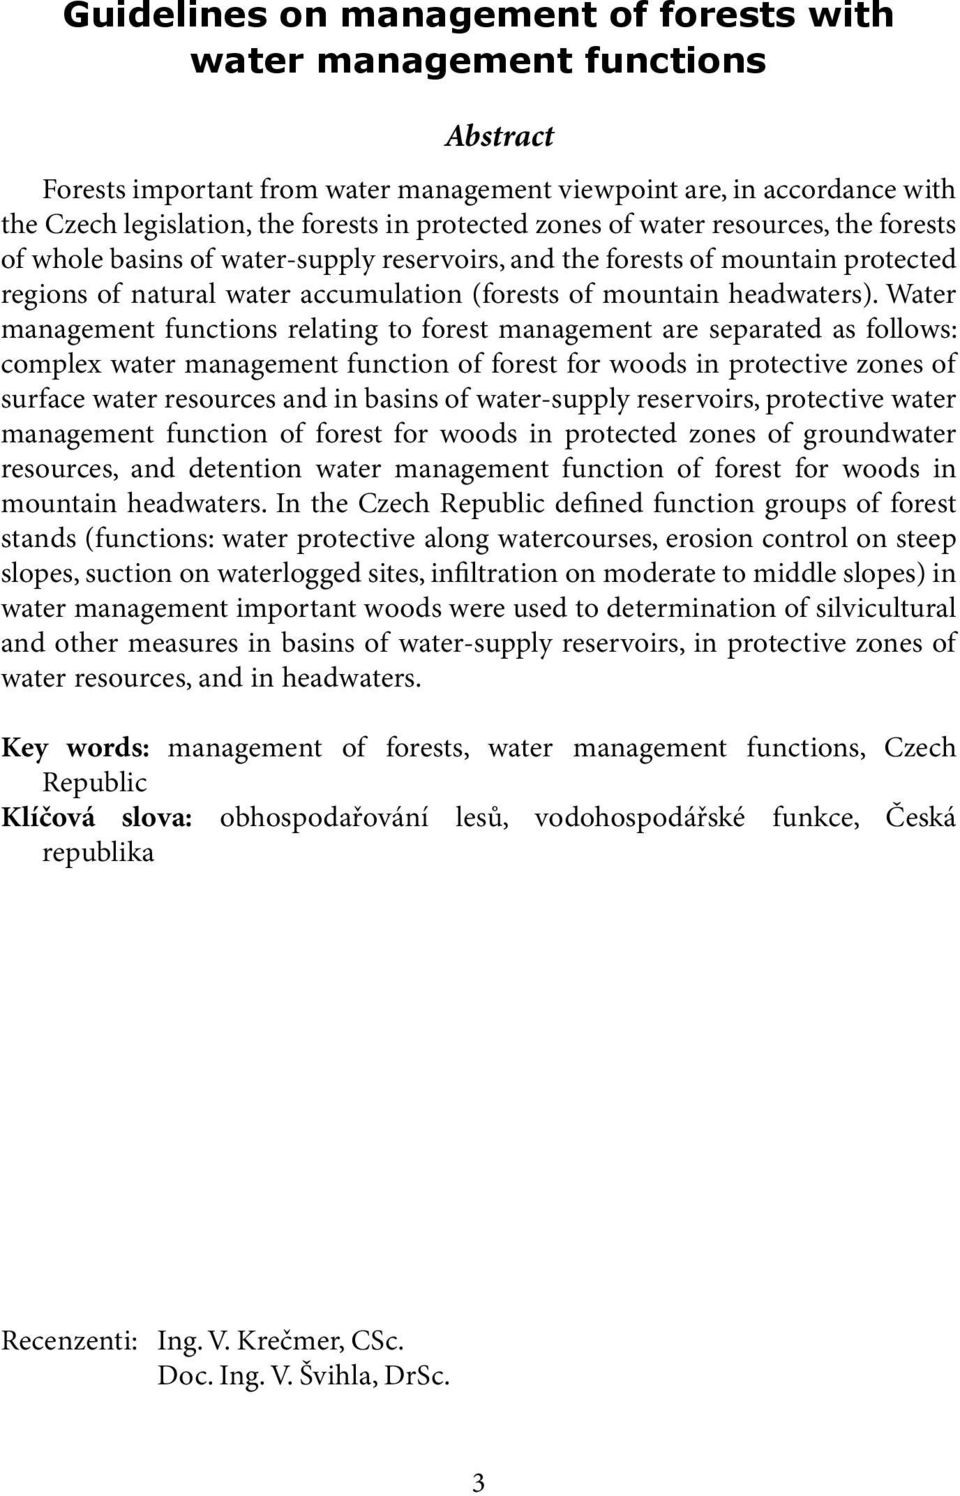 Water management functions relating to forest management are separated as follows: complex water management function of forest for woods in protective zones of surface water resources and in basins